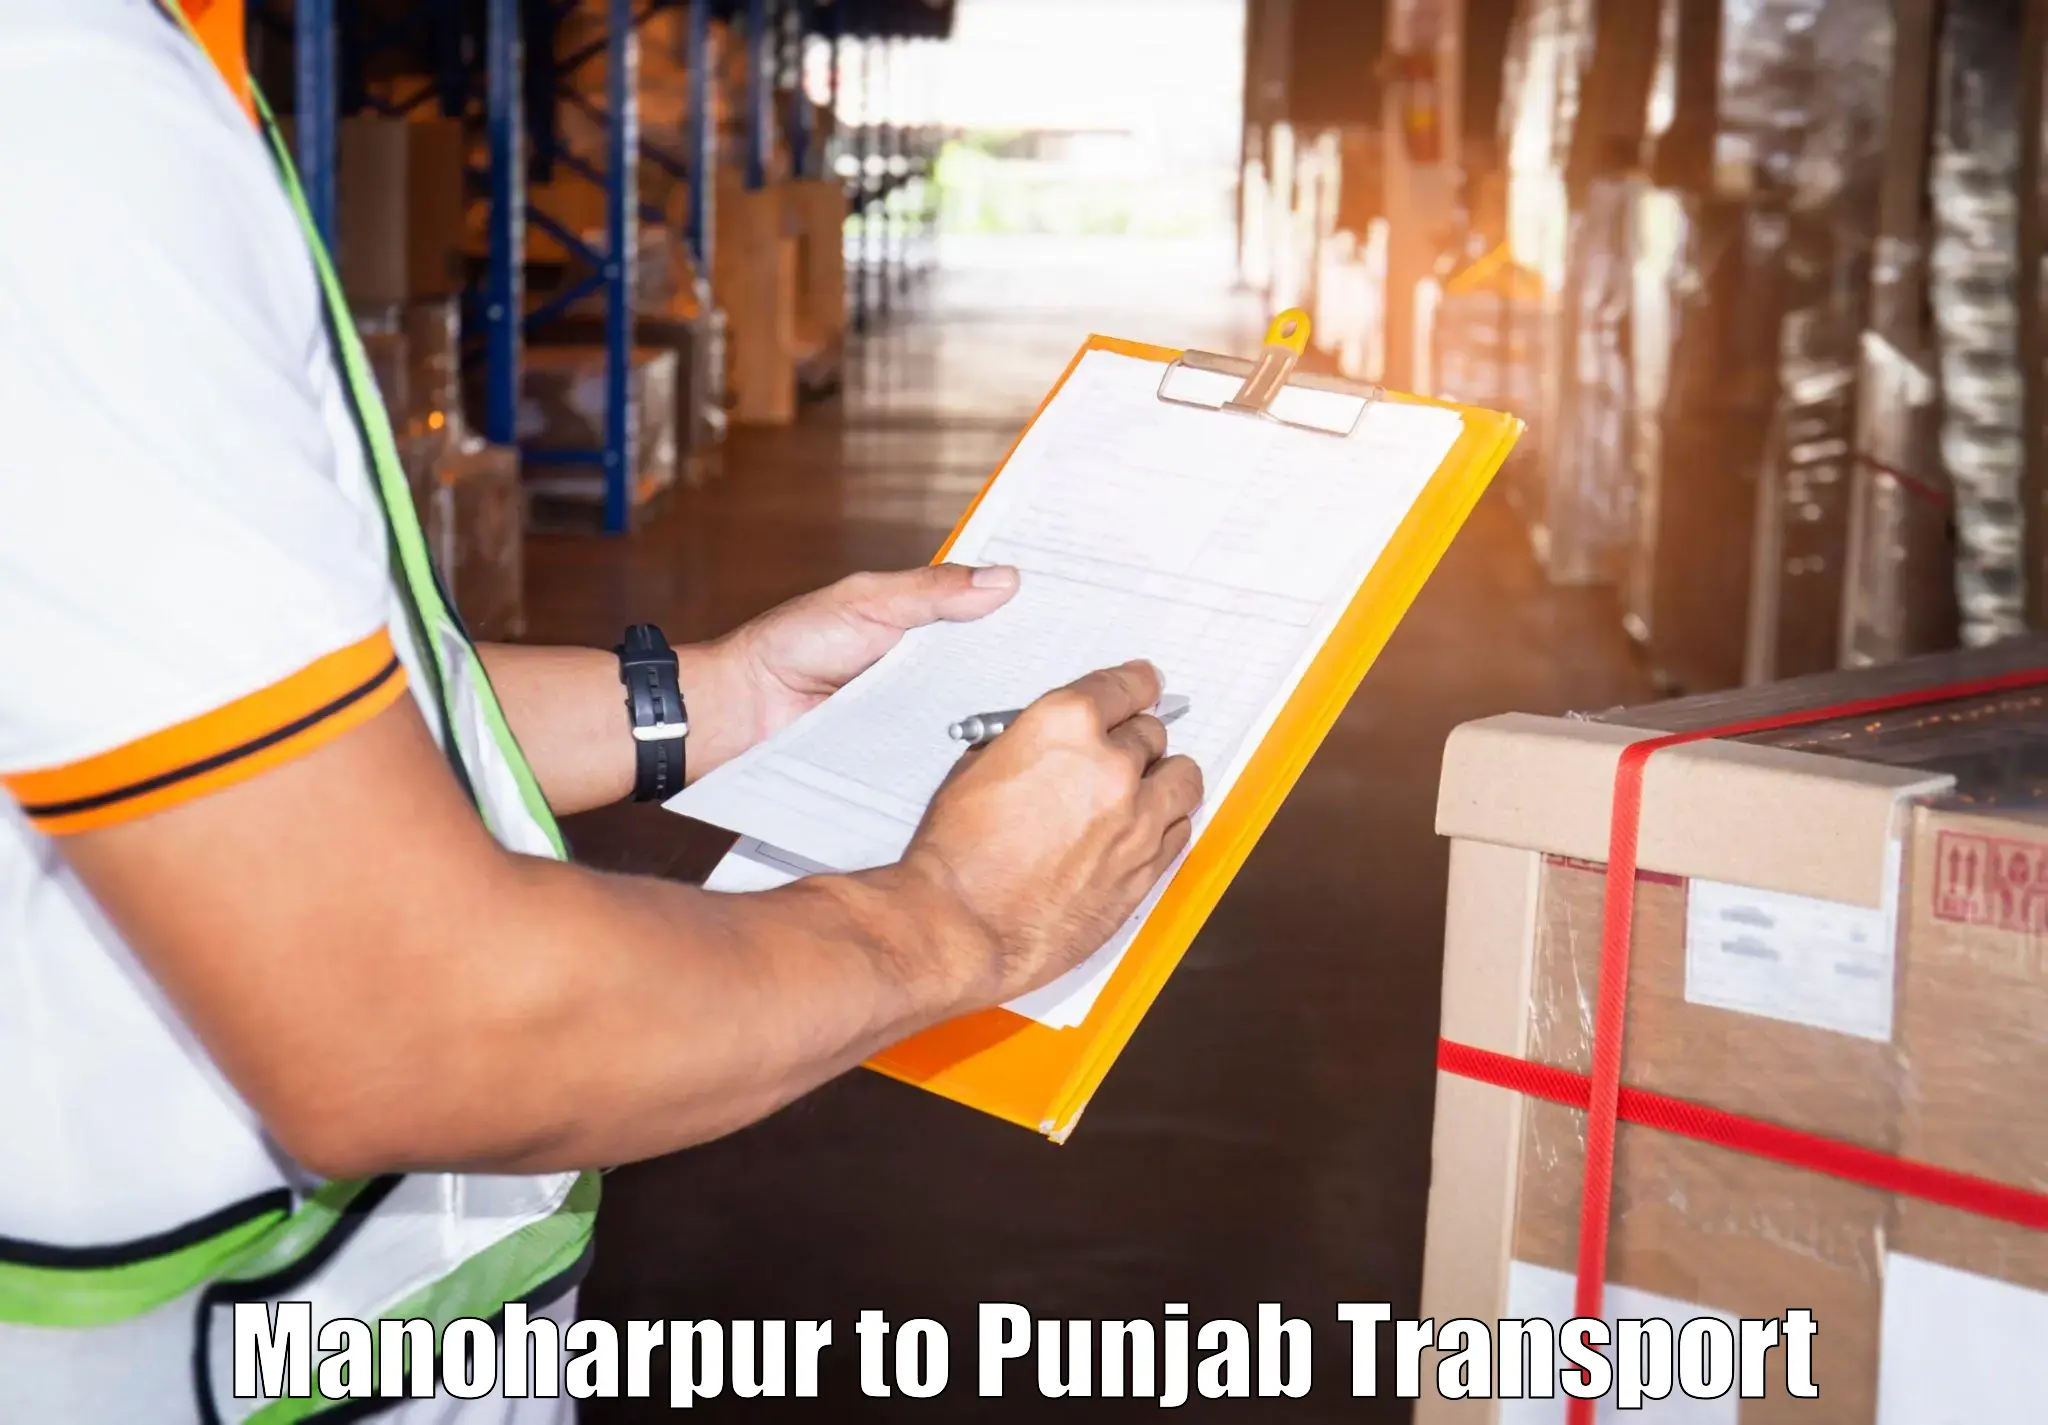 Commercial transport service Manoharpur to Pathankot